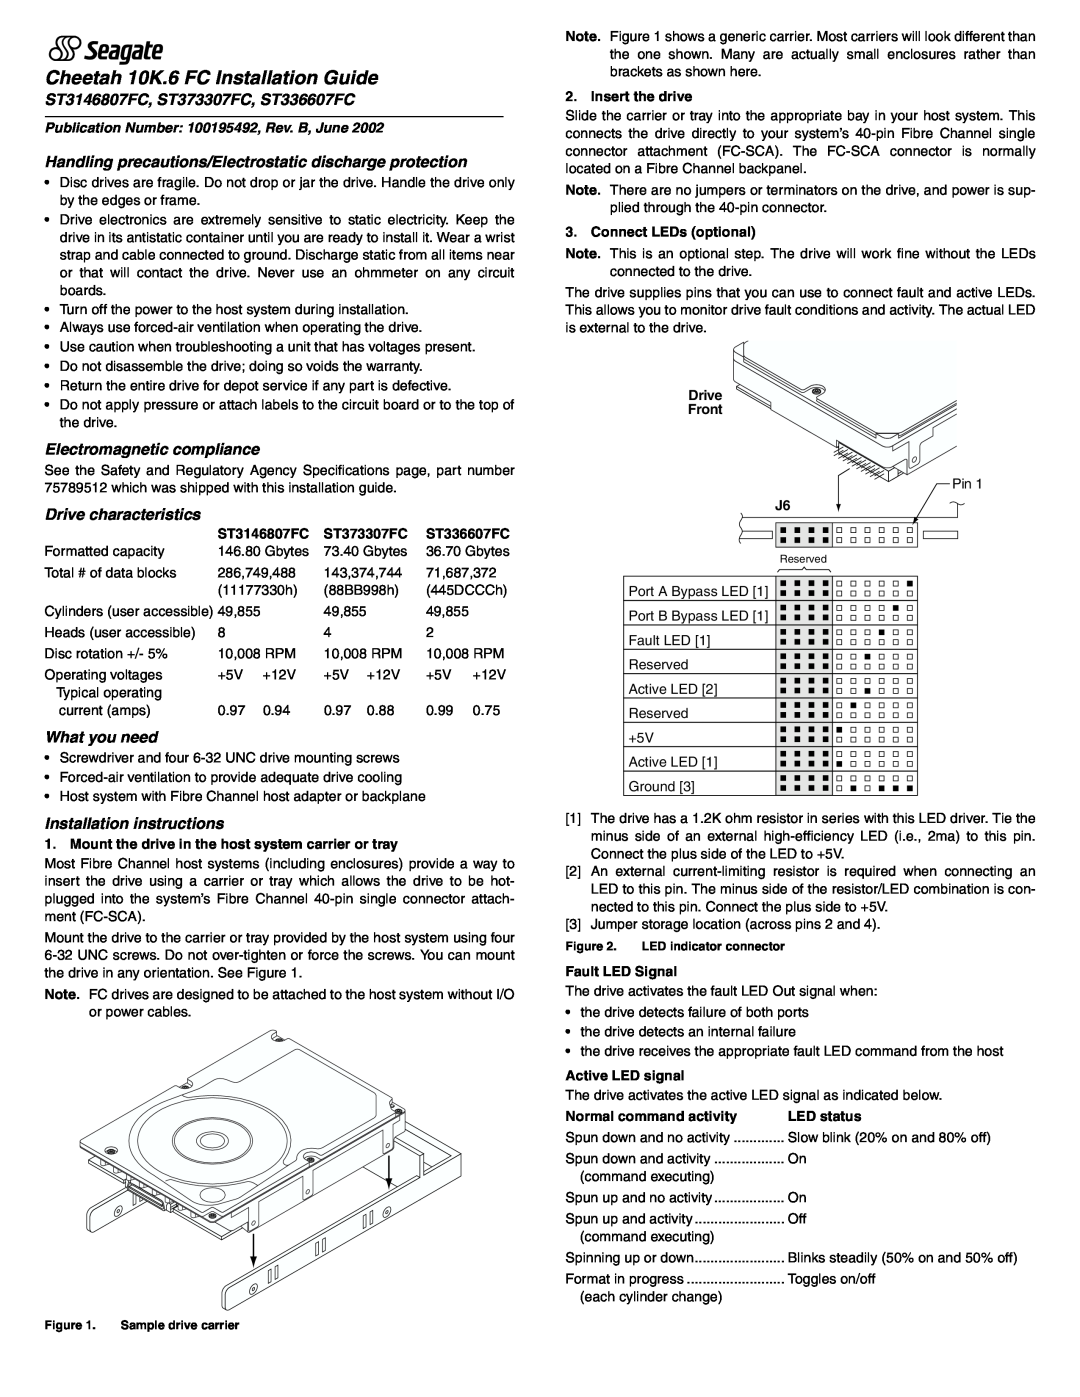 Seagate installation instructions ST3146807FC, ST373307FC, ST336607FC, Electromagnetic compliance, What you need 